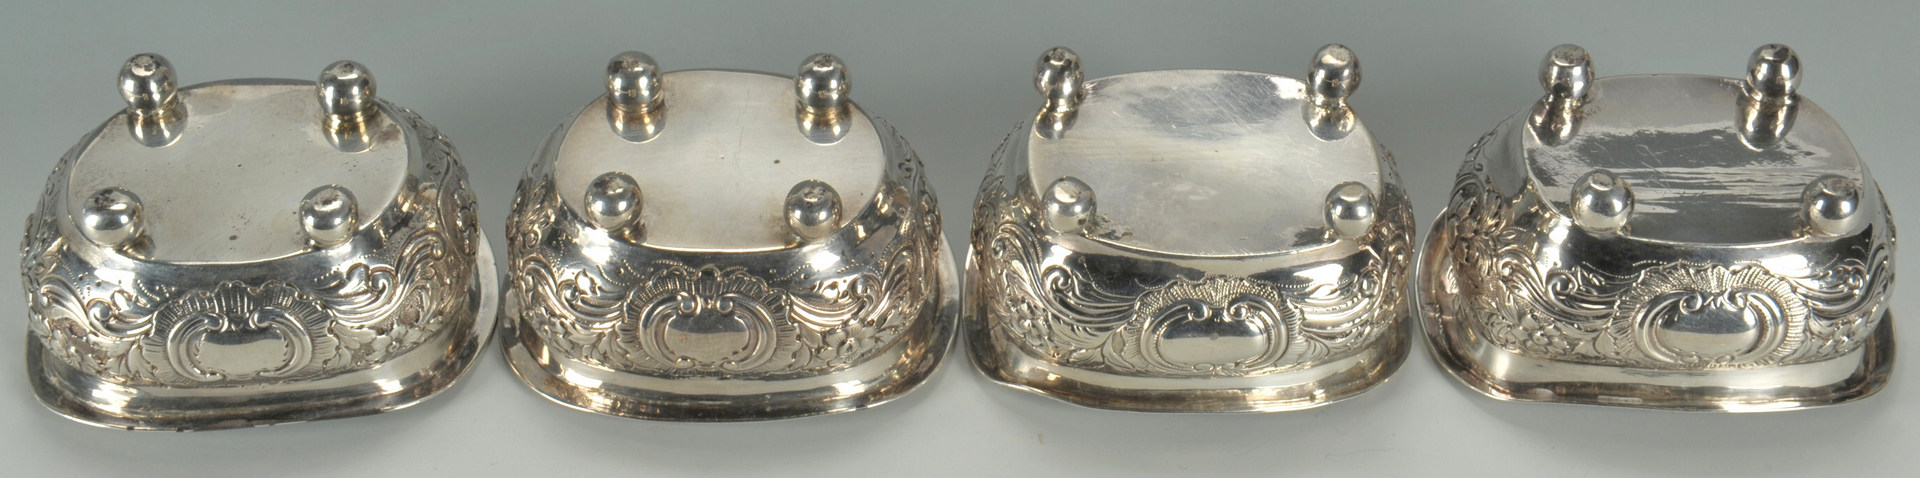 Lot 438: Four Victorian sterling silver salts and spoons